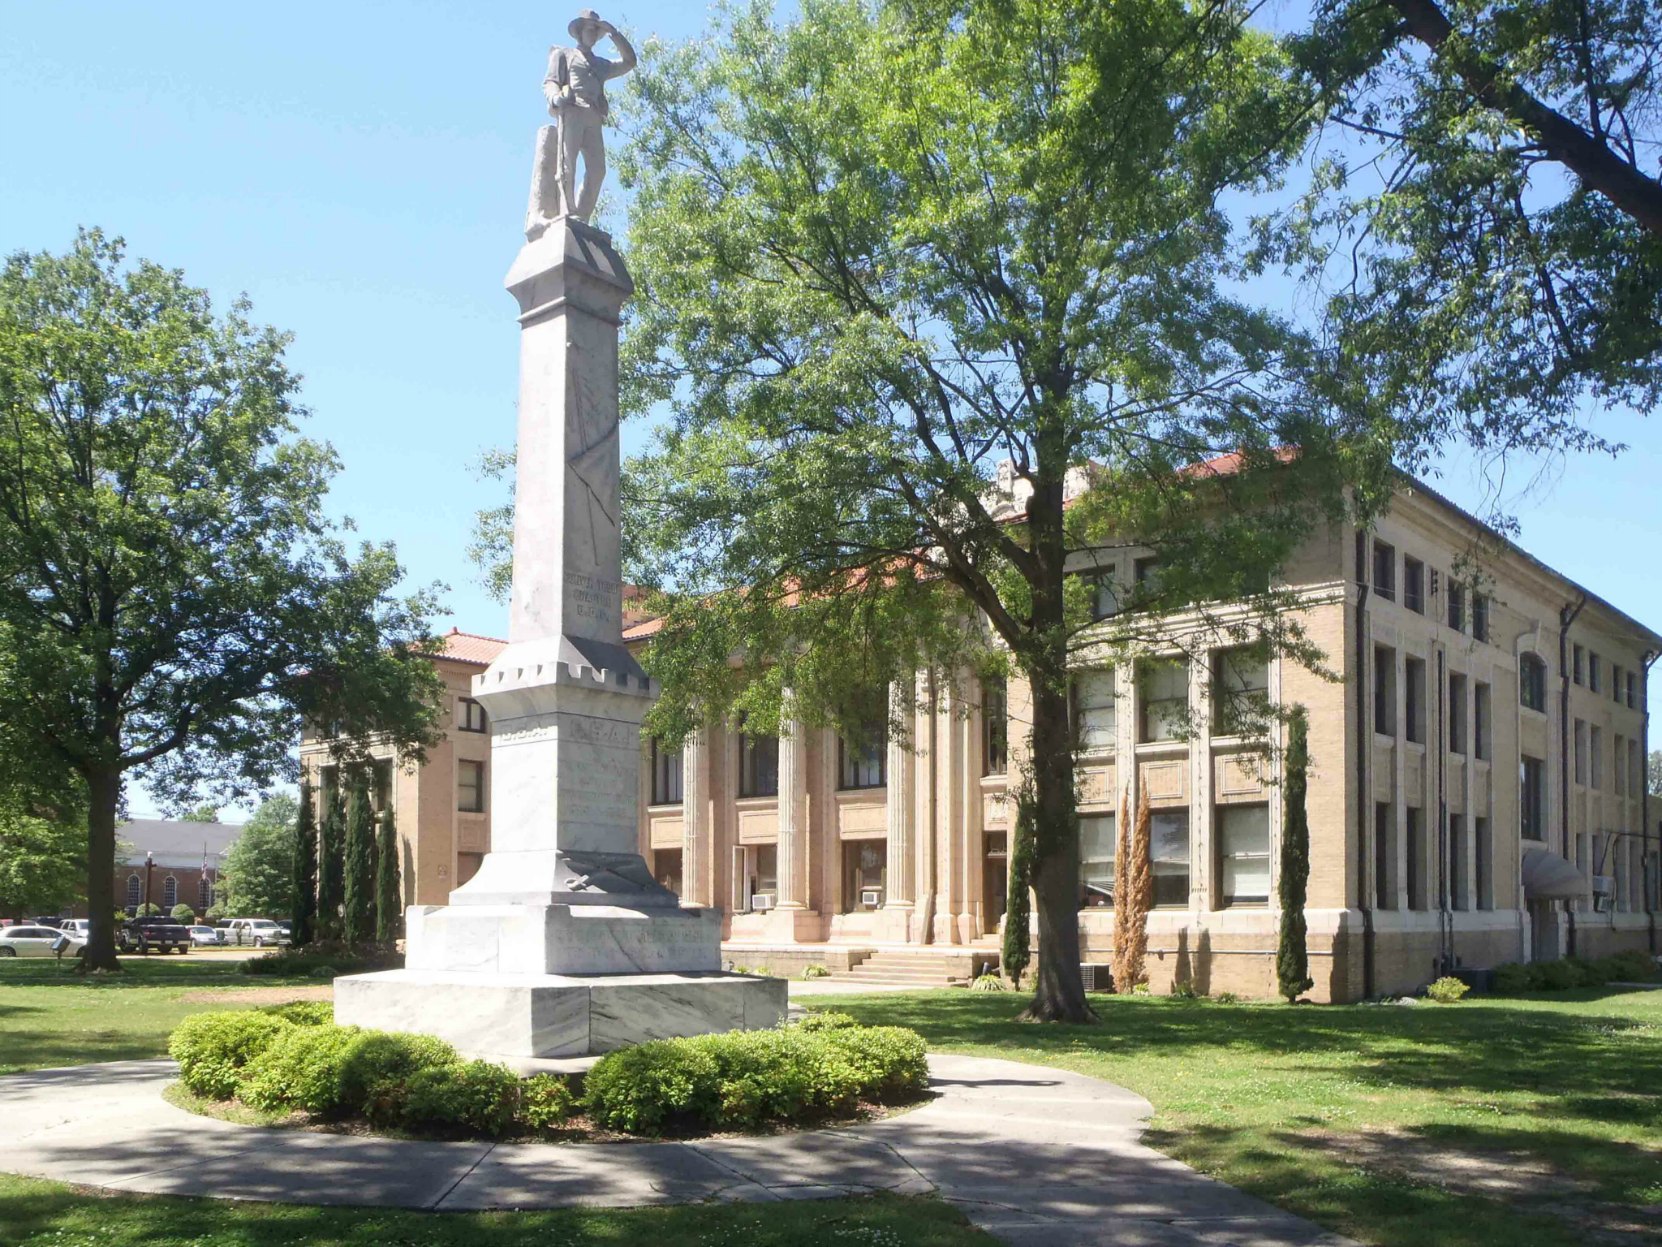 The Bolivar County Courthouse now stands on the site of W.C. Handy's Enlightenment About The Blues